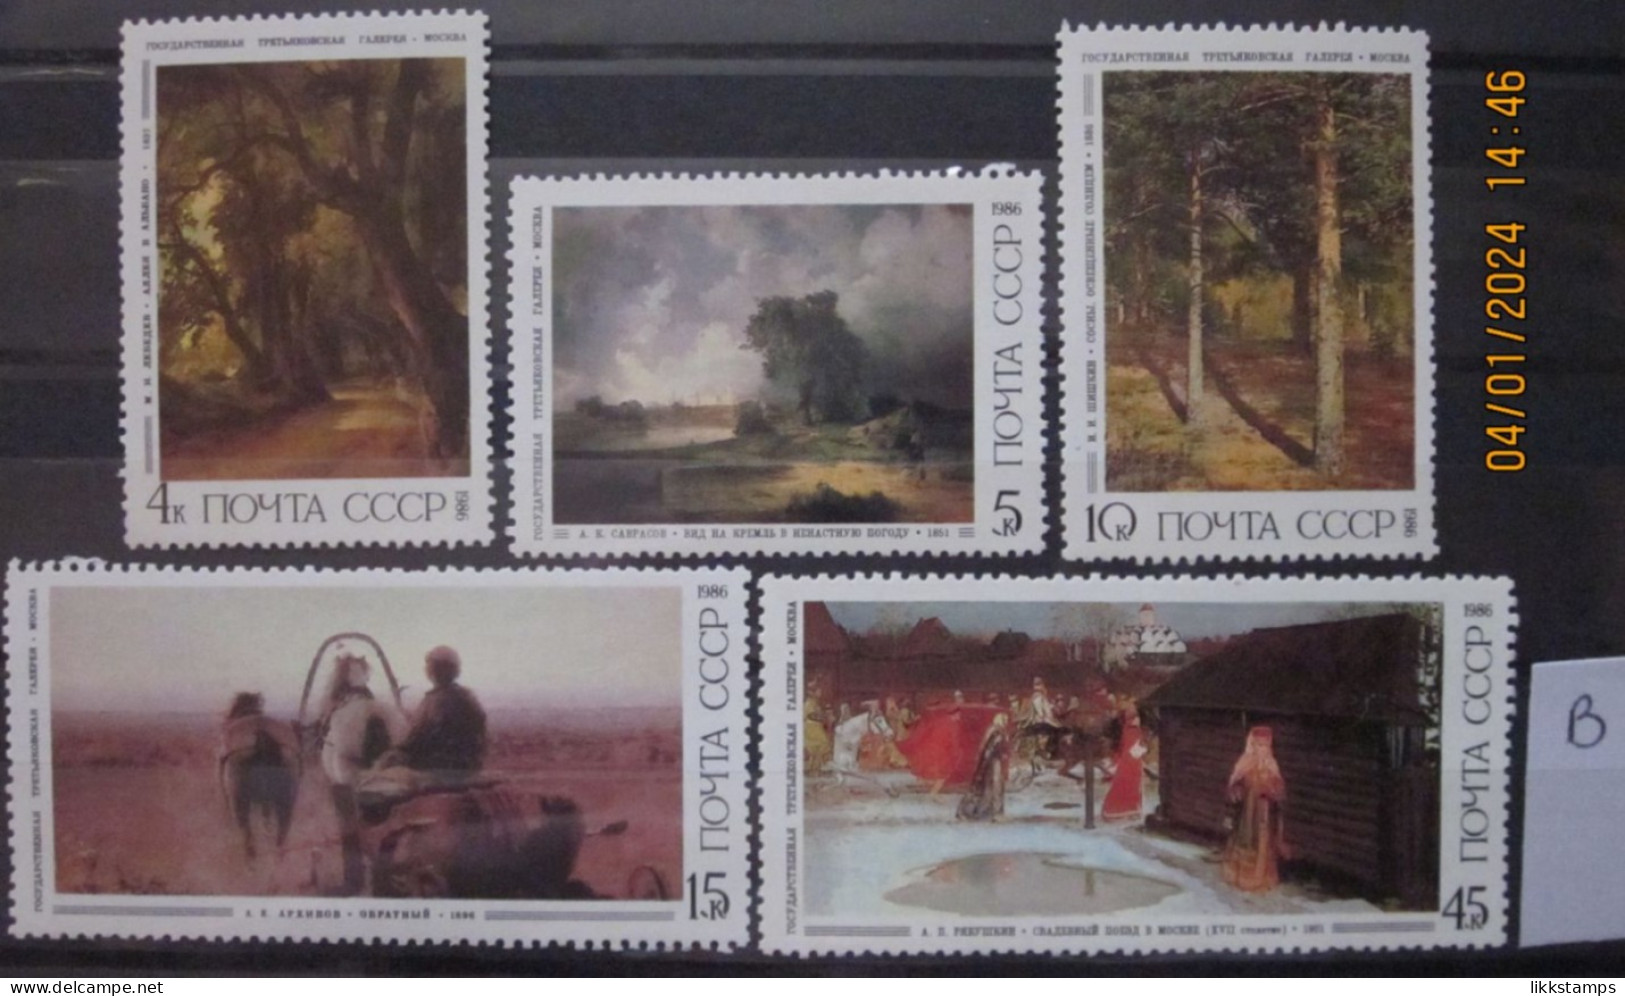 RUSSIA ~ 1986 ~ S.G. NUMBERS 5663 - 5667, ~ 'LOT B' ~ RUSSIAN PAINTINGS. ~ MNH #03647 - Unused Stamps